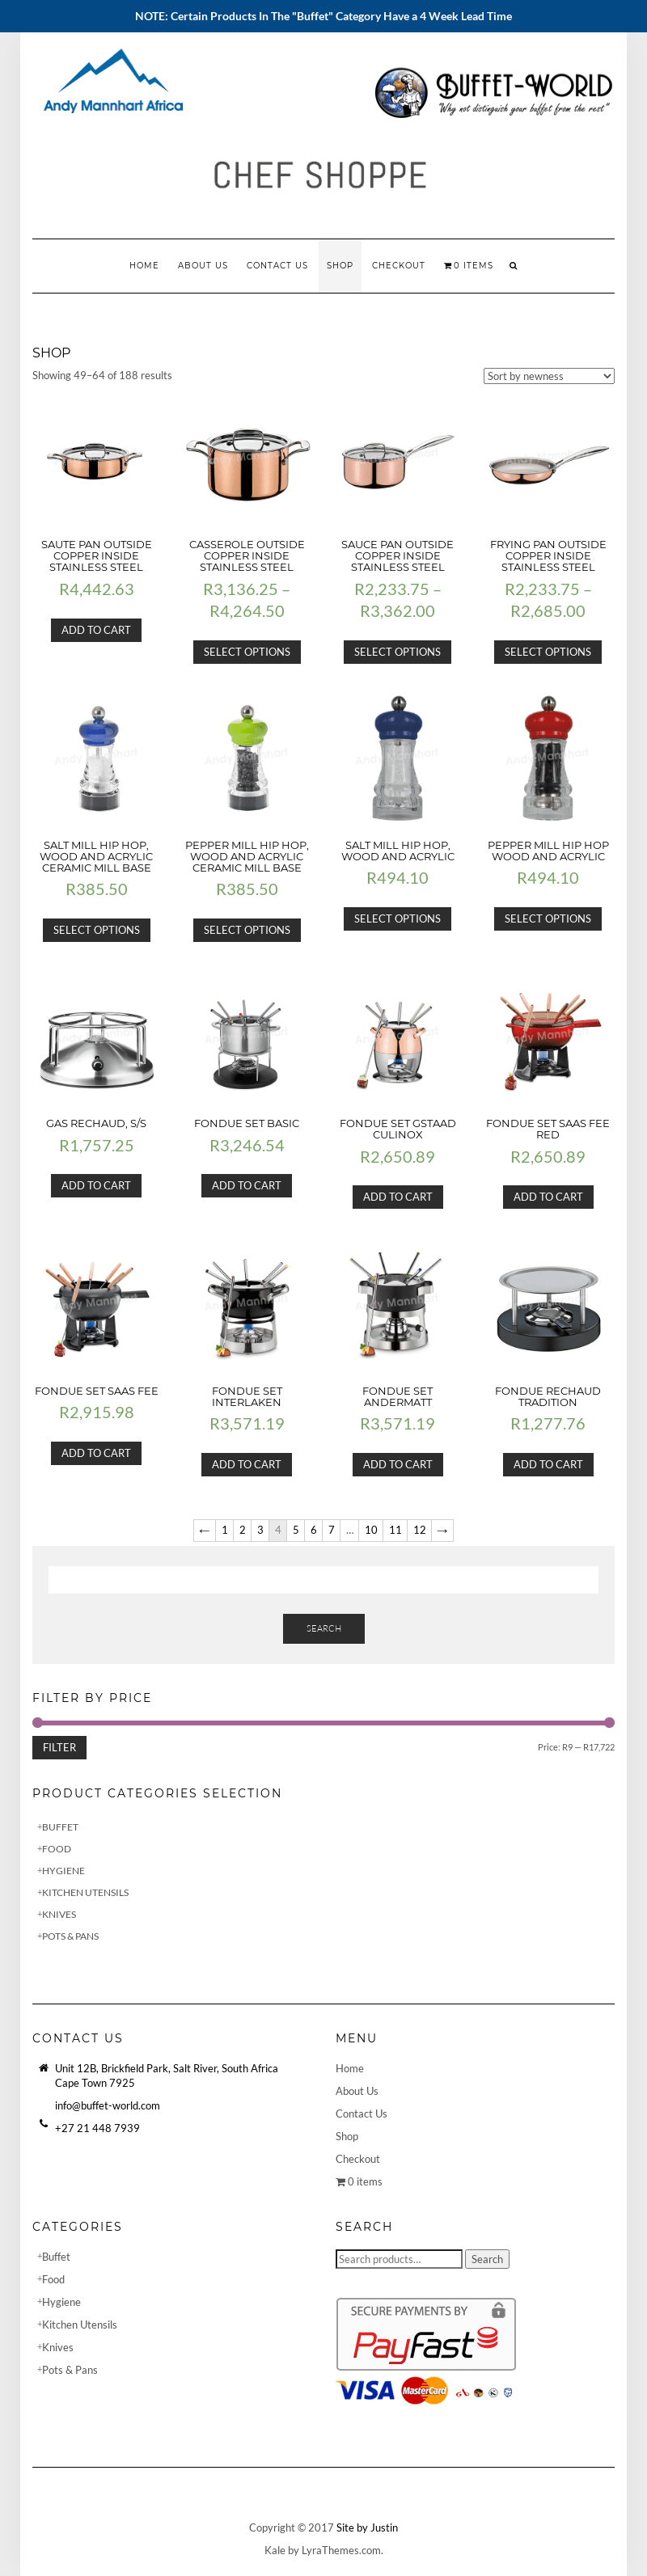 Our kitchenware product list